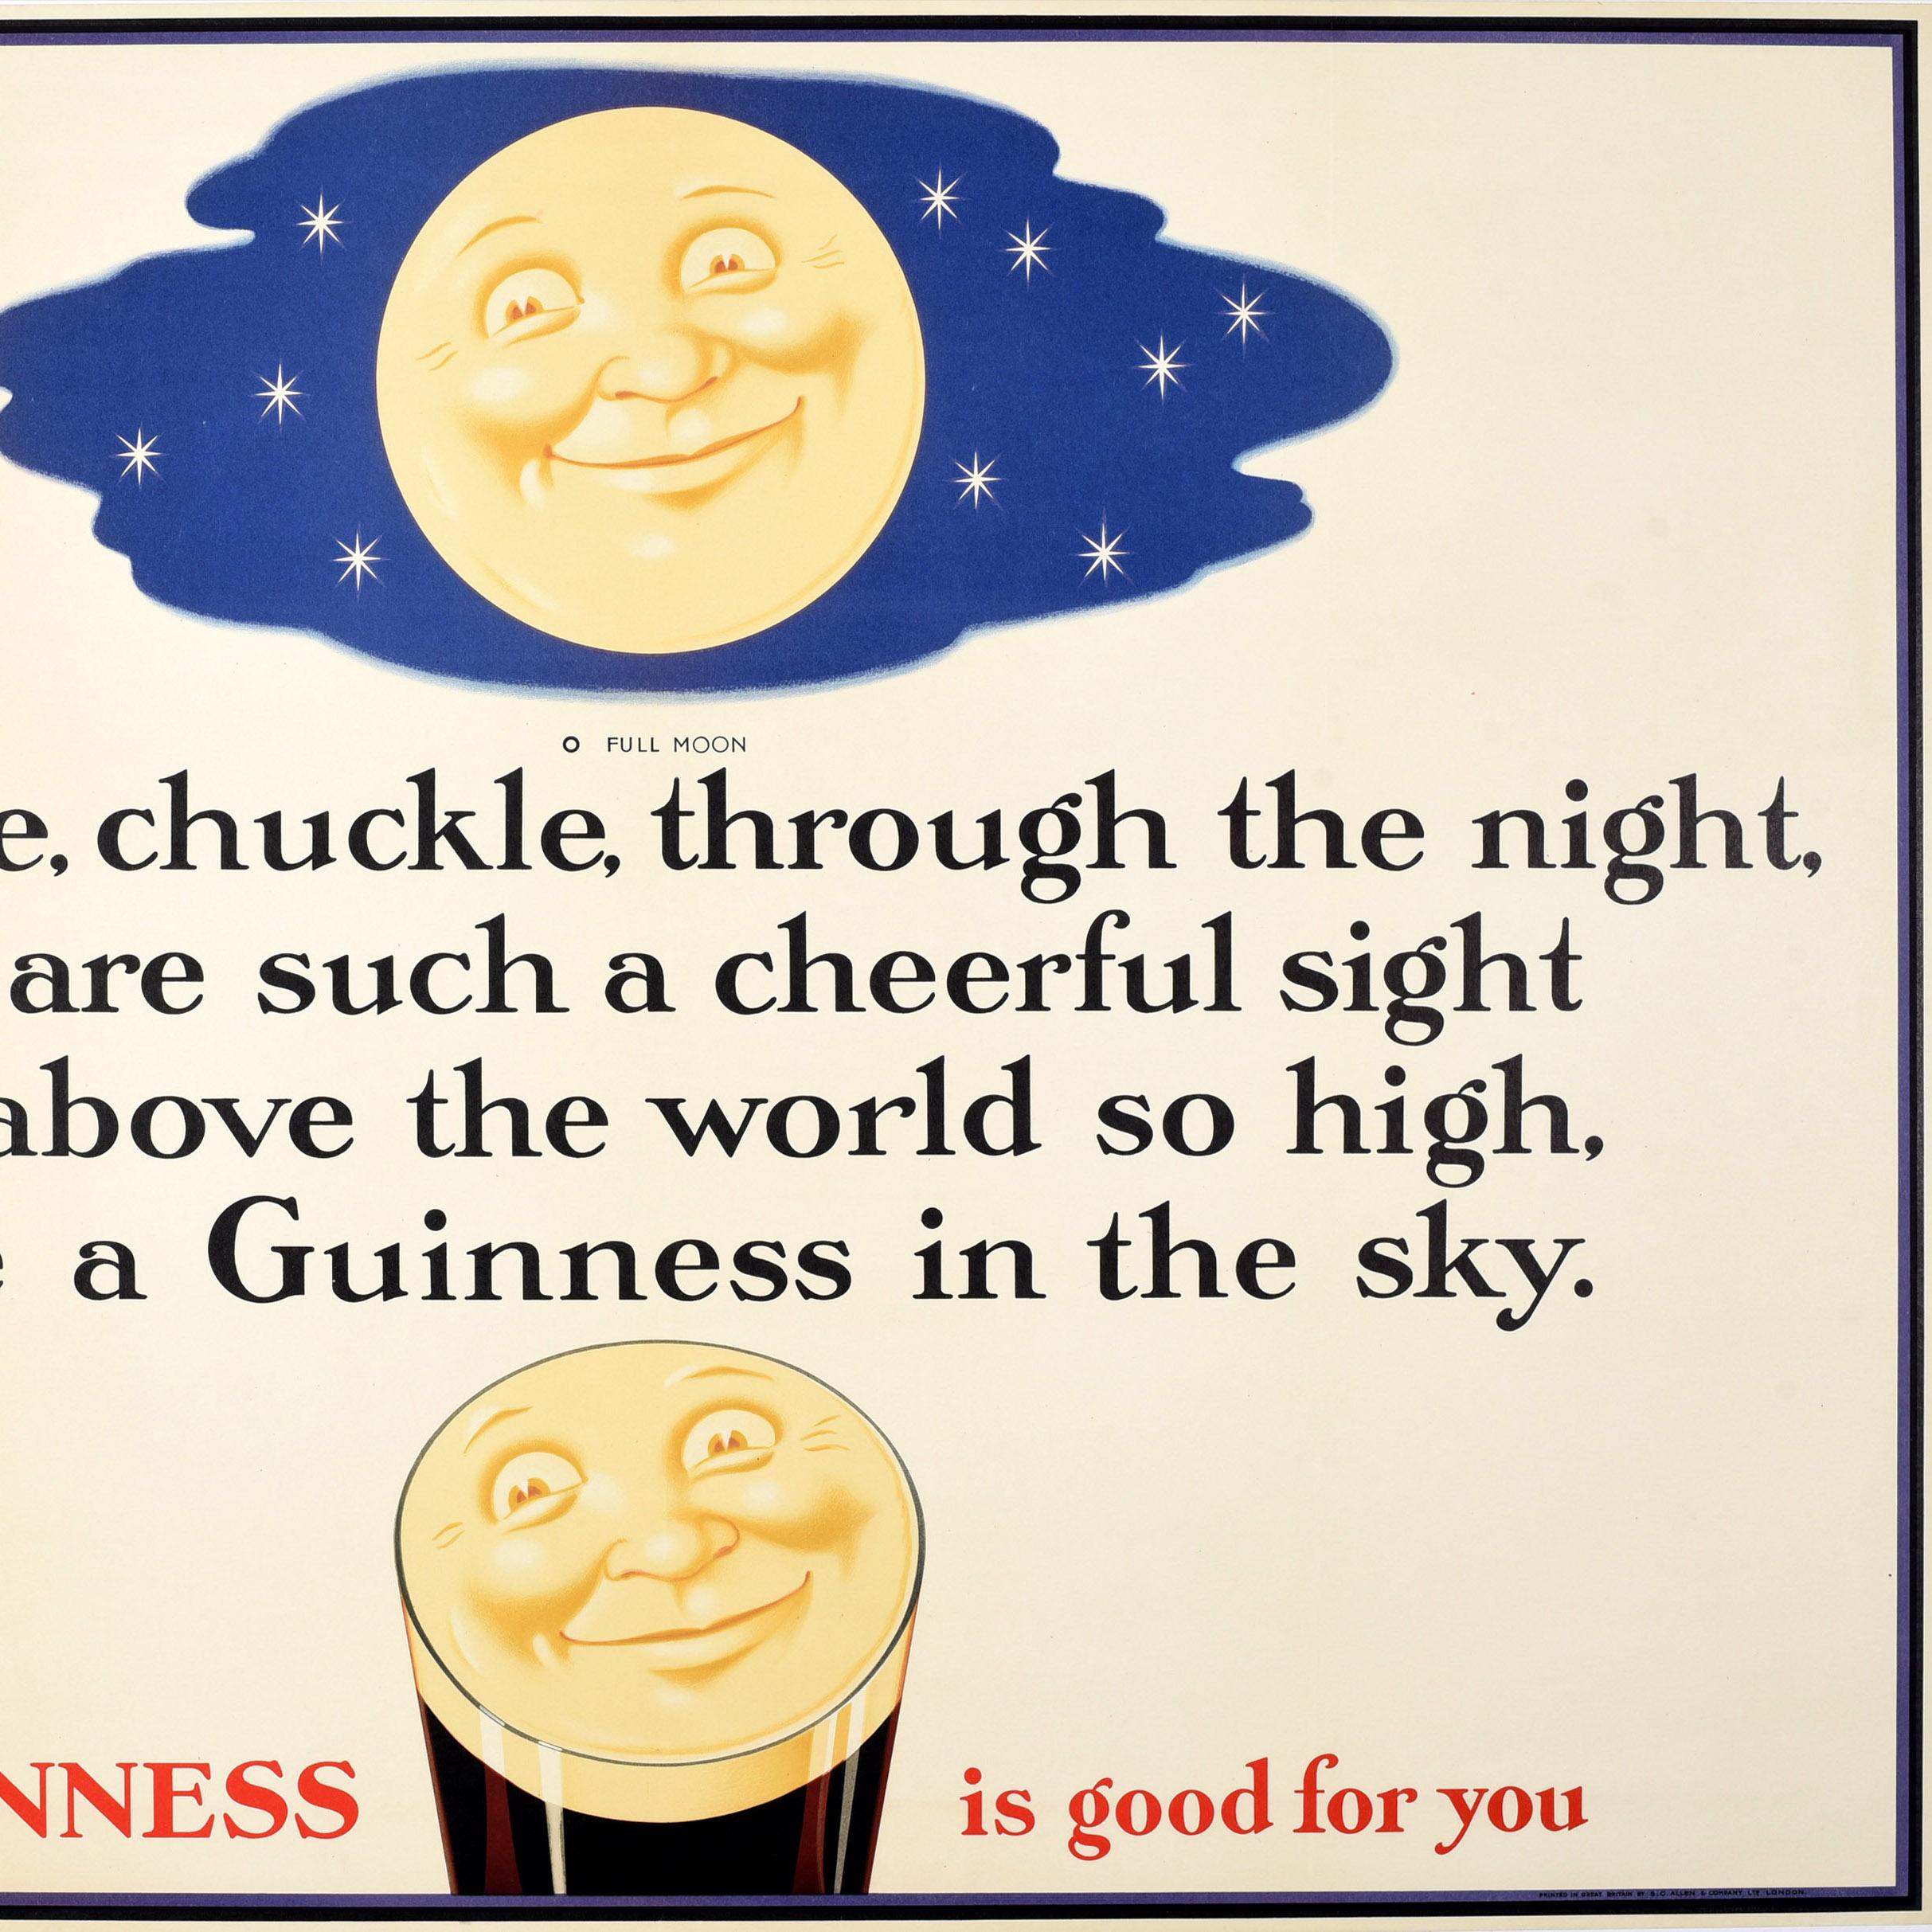 Original Vintage Drink Advertising Poster Guinness Is Good For You Lullaby Art In Excellent Condition For Sale In London, GB